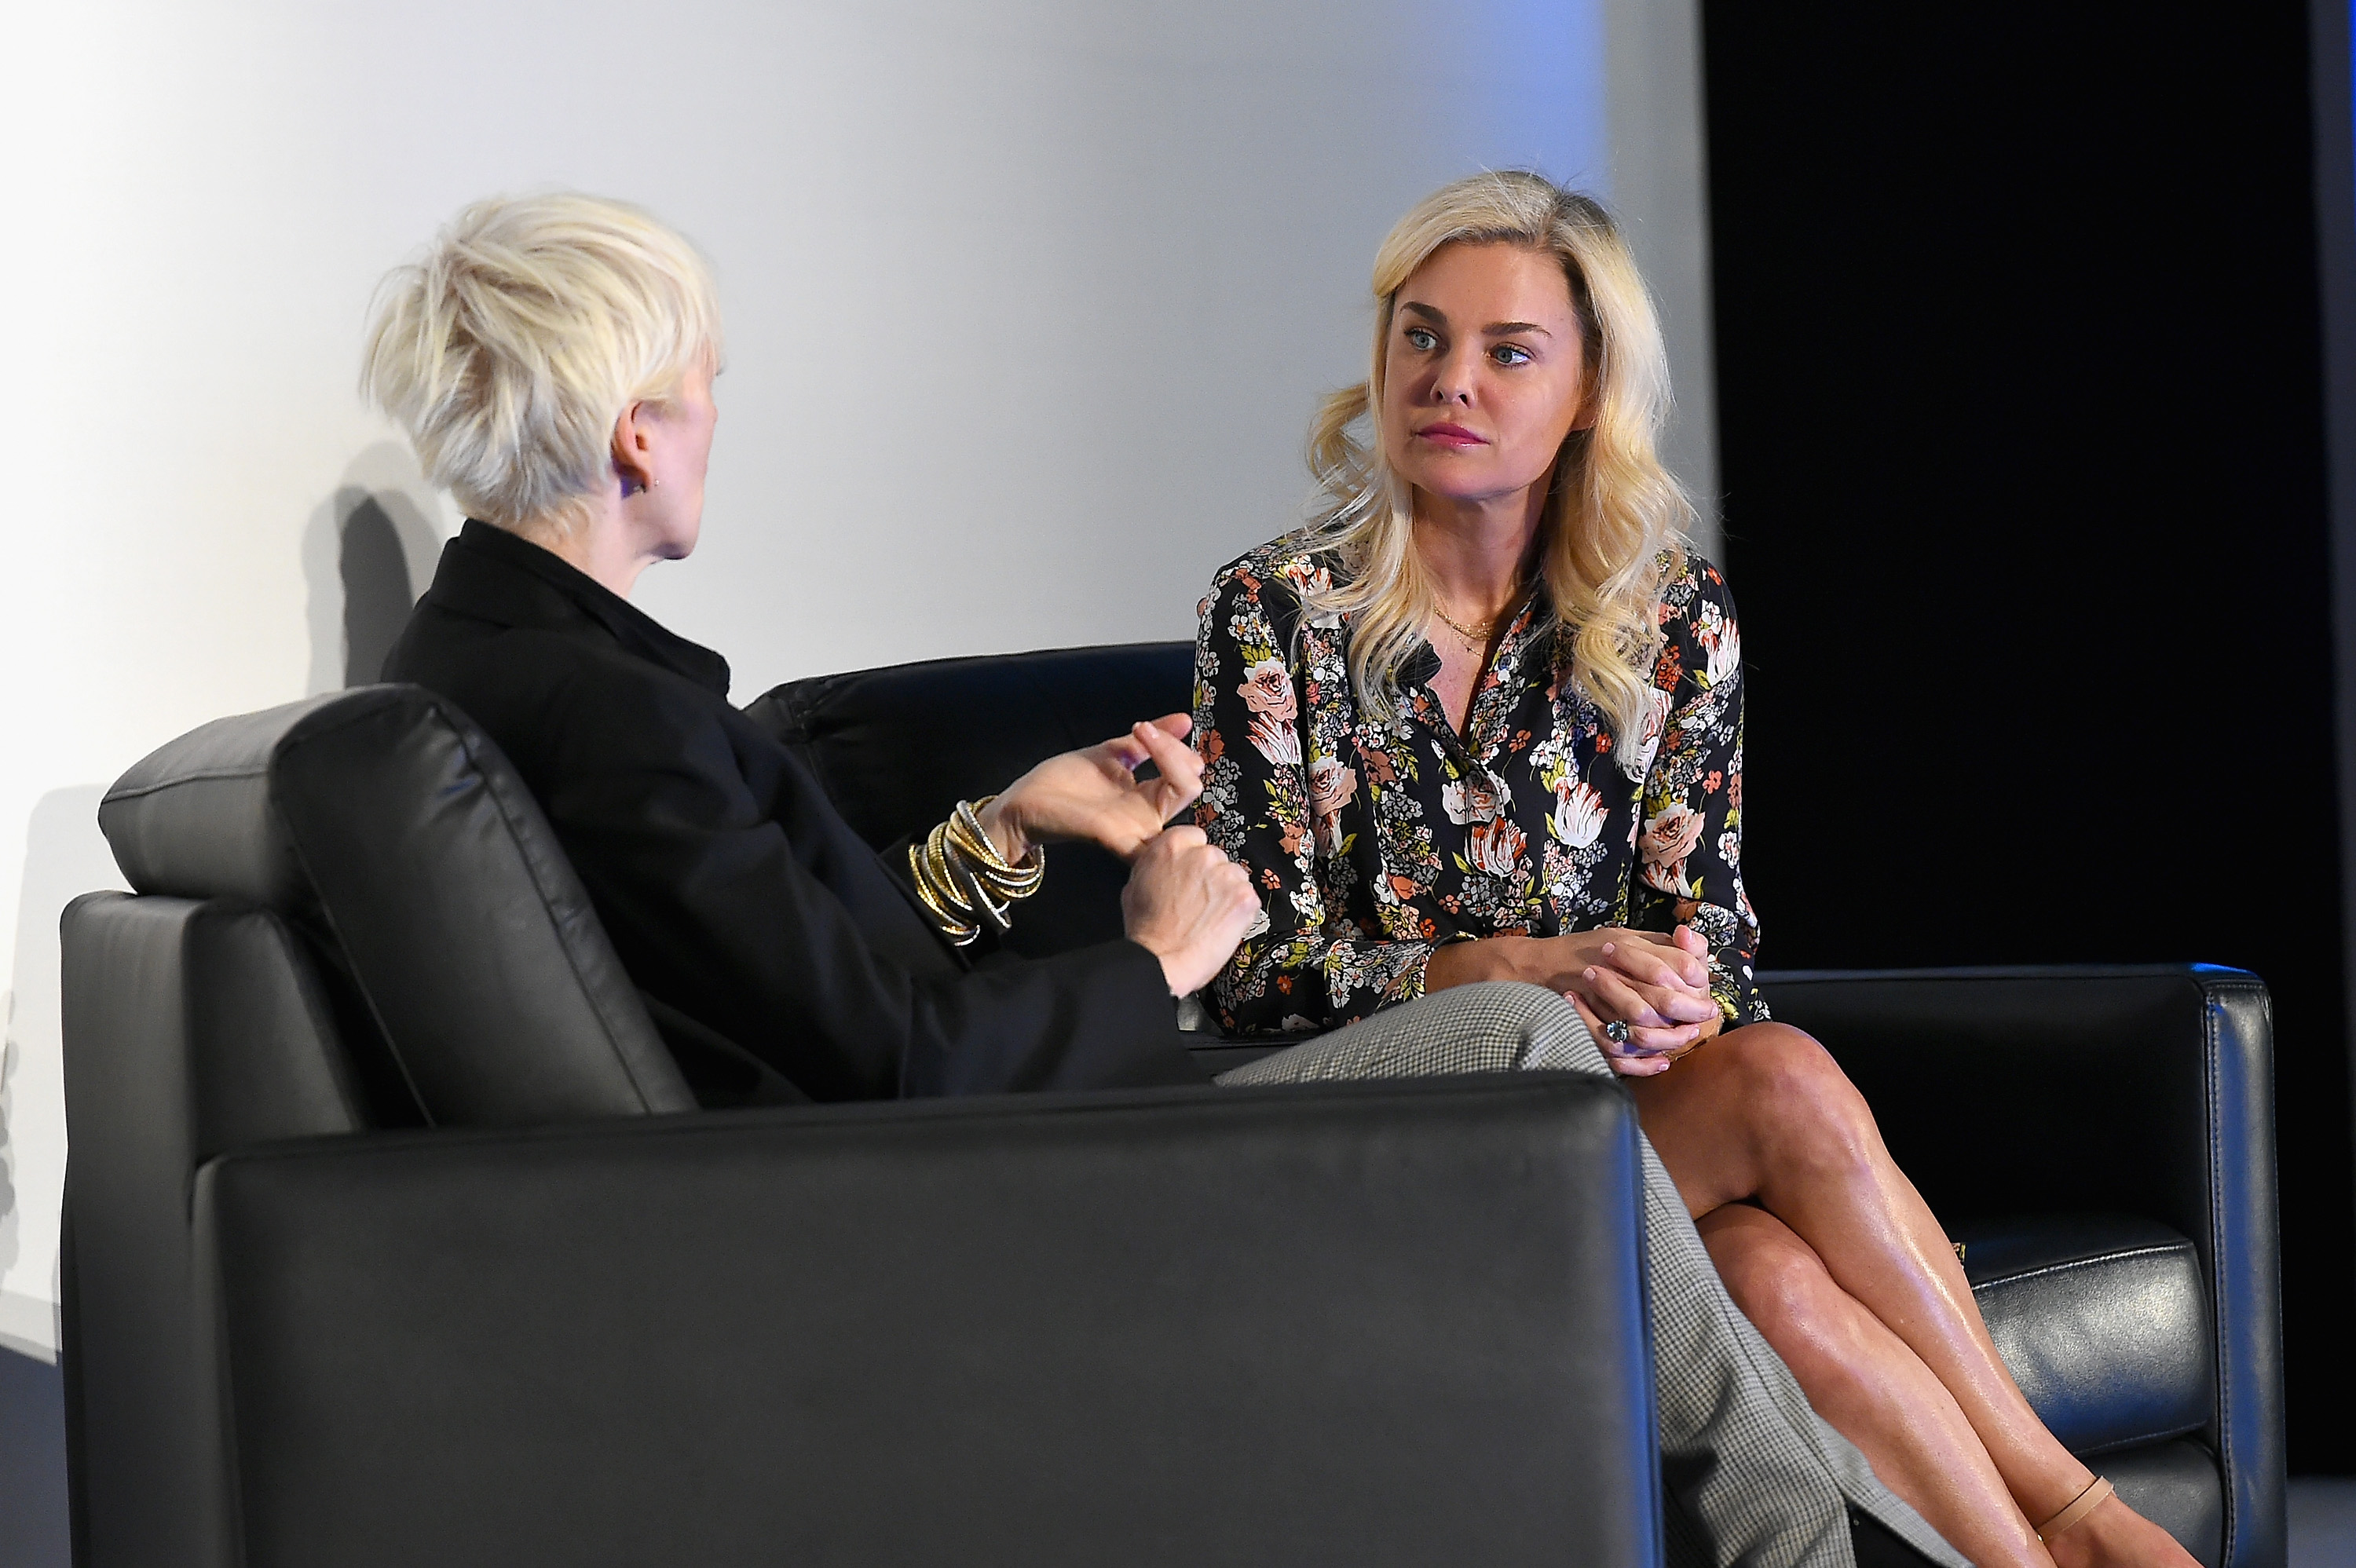 Hearst Magazines’ Joanna Coles interviews Amazon Fashion President Christine Beauchamp onstage at the American Magazine Media Conference 2018.